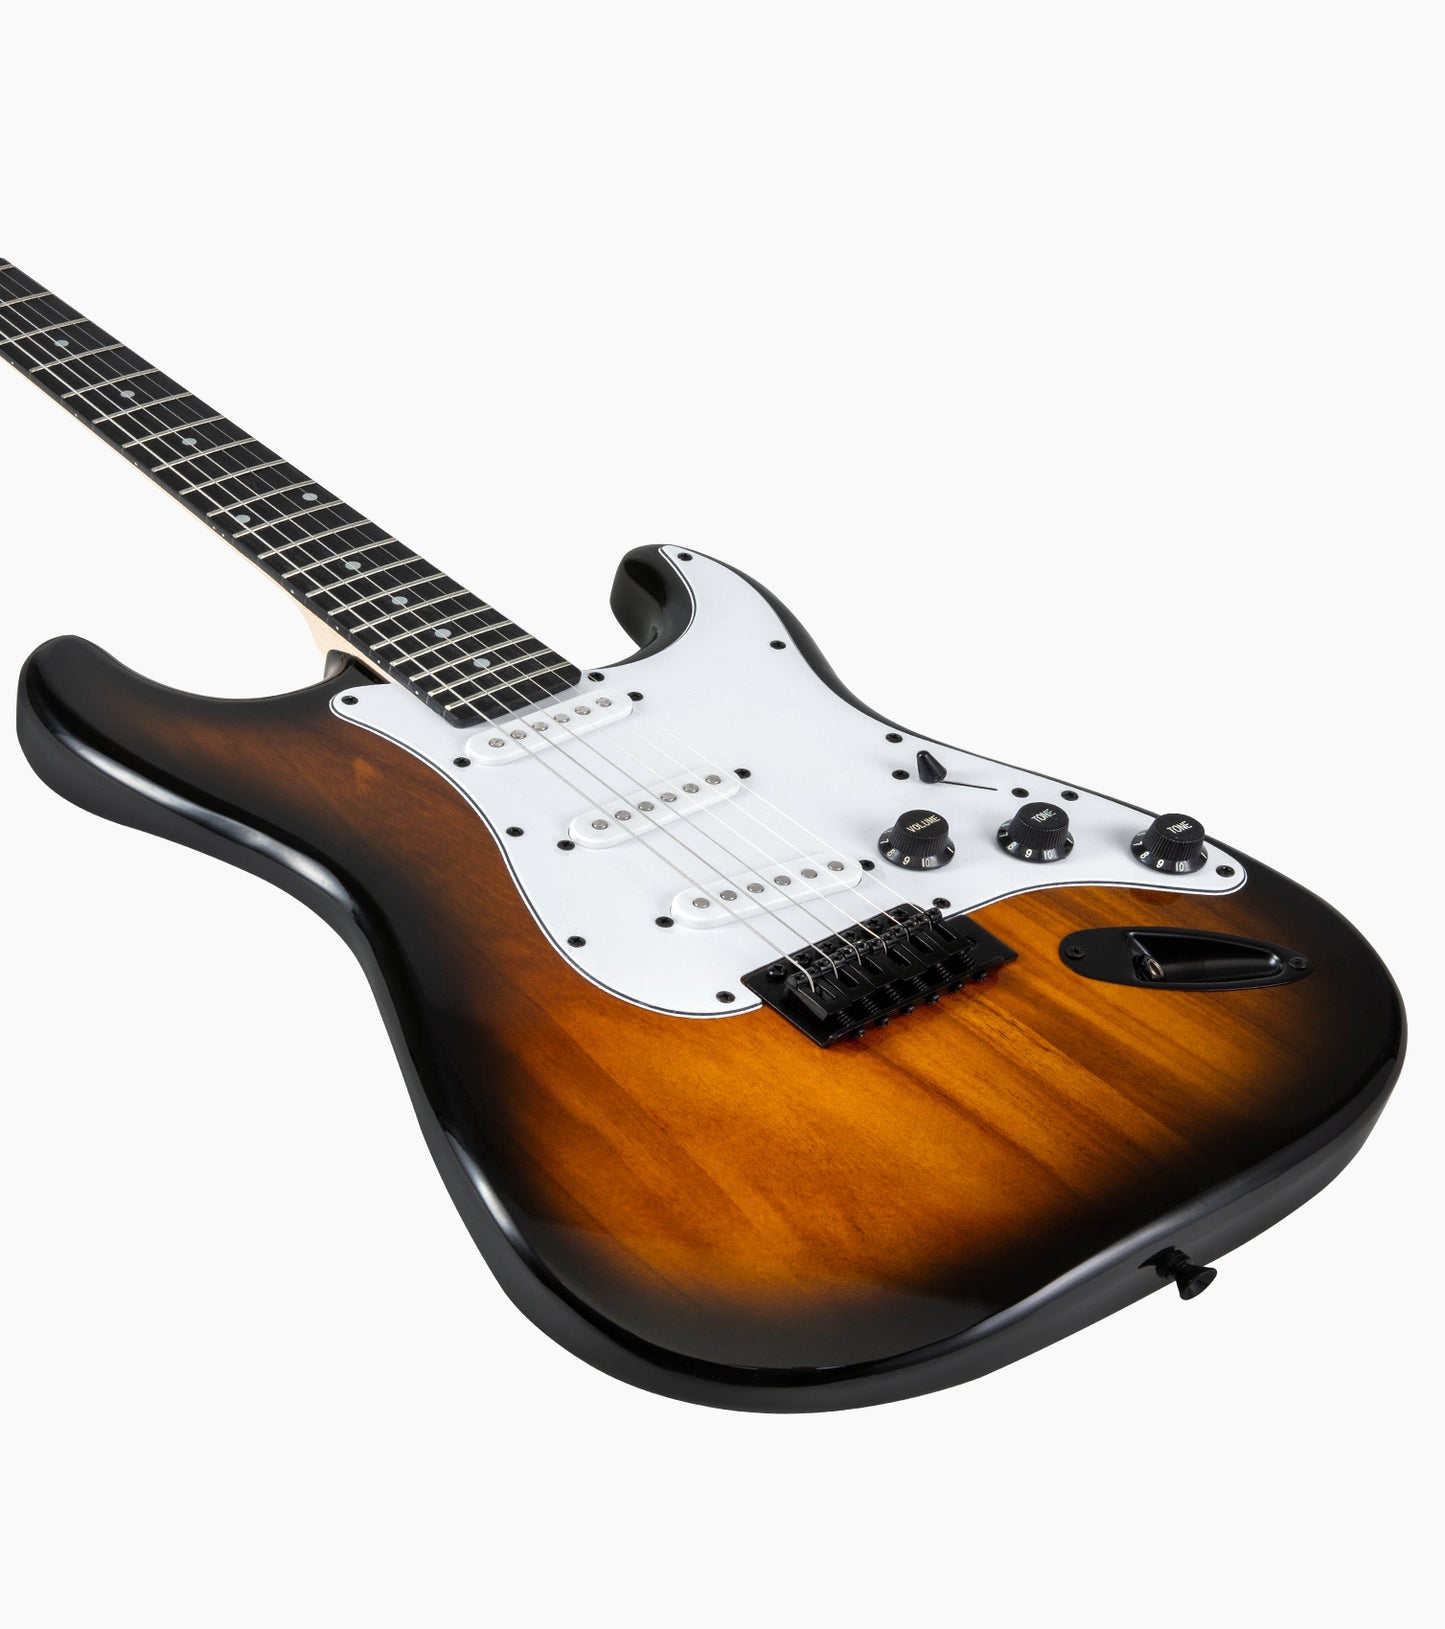 39 in Sunbrust Stratocaster Electric Guitar - Hero Image